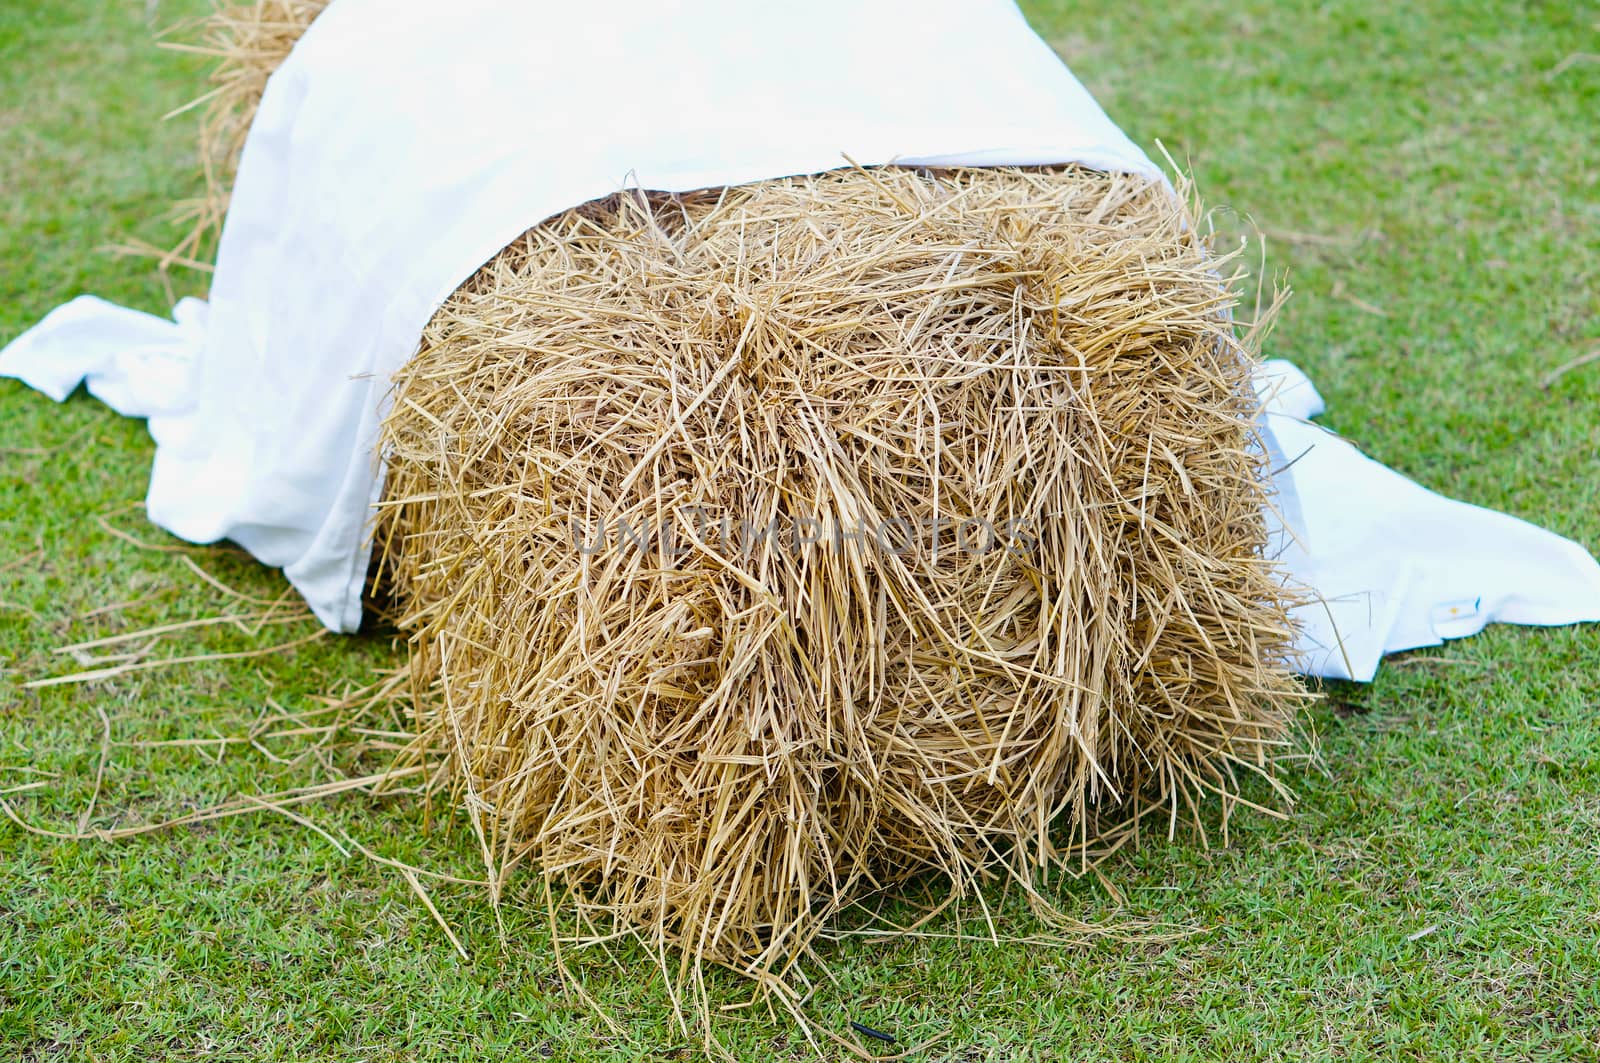 Pile of straw hay by product from rice field with white fabric on top.